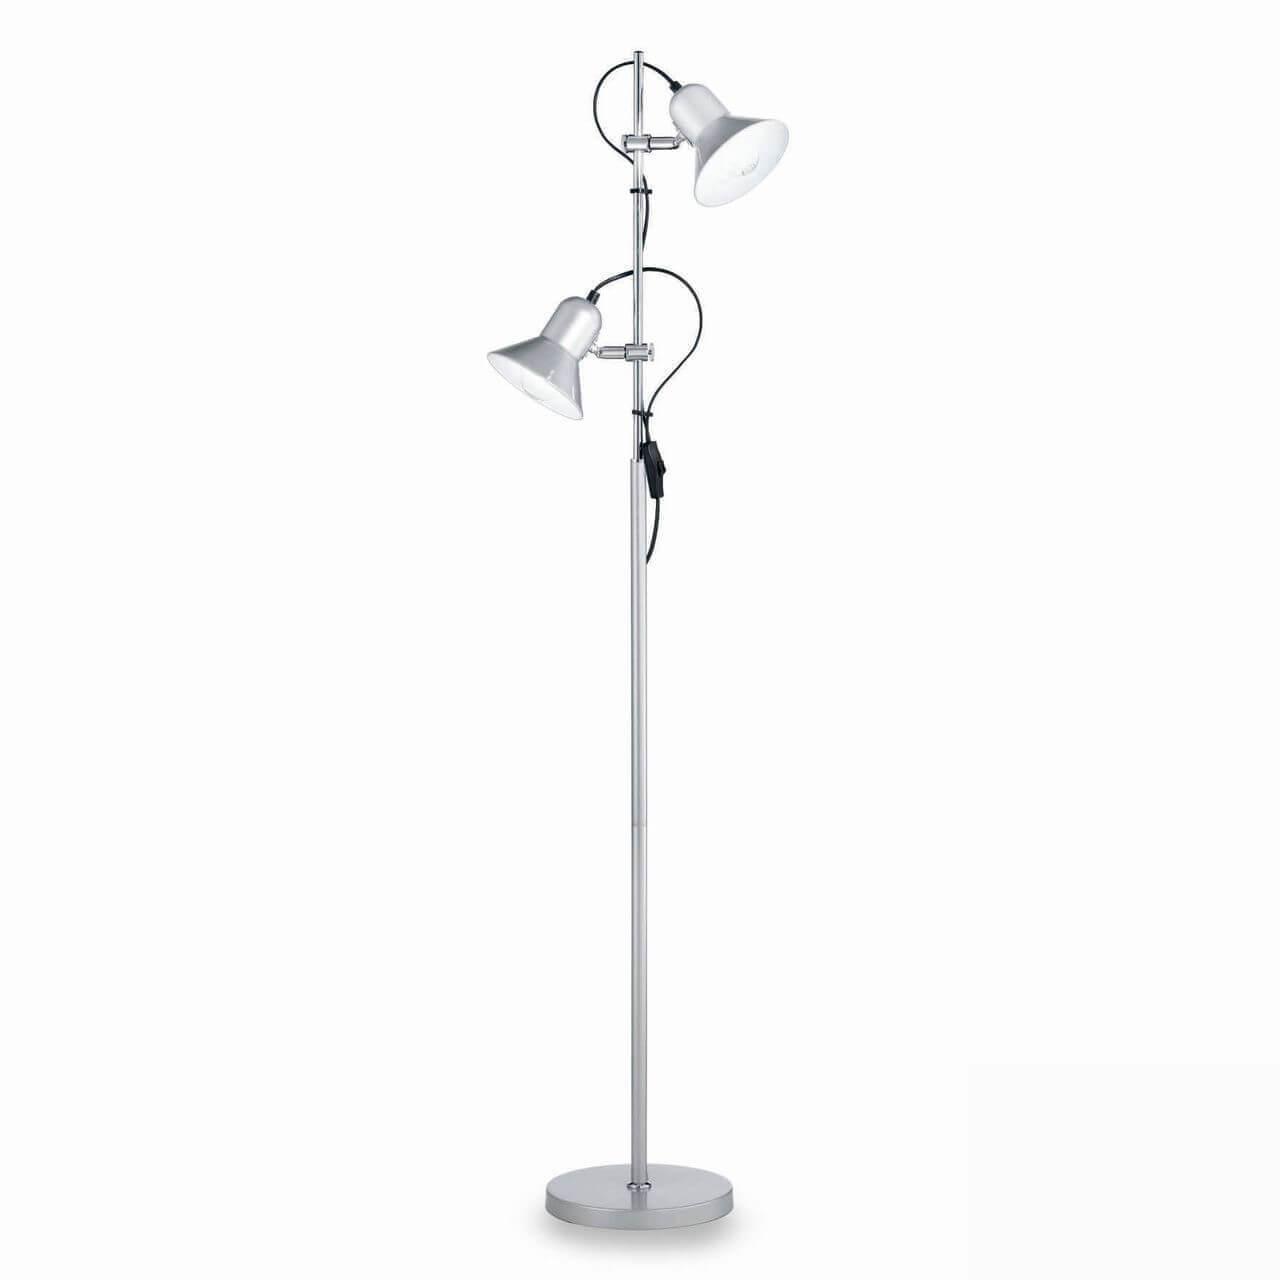  Ideal Lux Polly PT2 Argento 061115